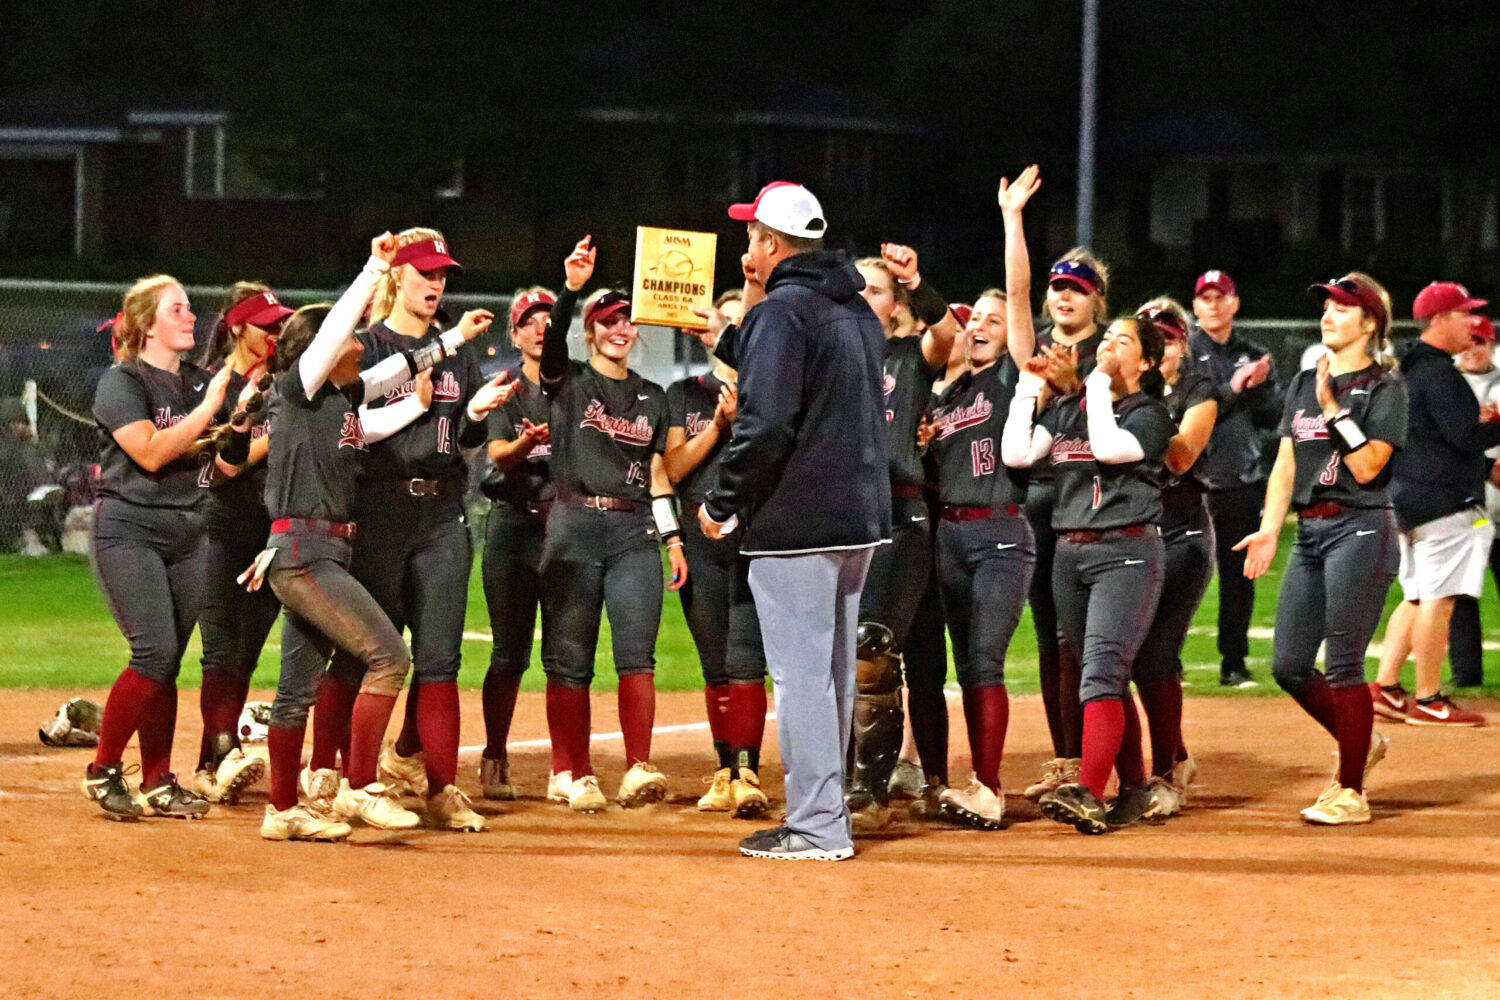 The Hartselle Tigers are awarded the Area Championship plaque by Hartselle Athletic Director Pat Smith after they defeated Muscle Shoals 4-1 in the championship game. Photo by Jim Meadows